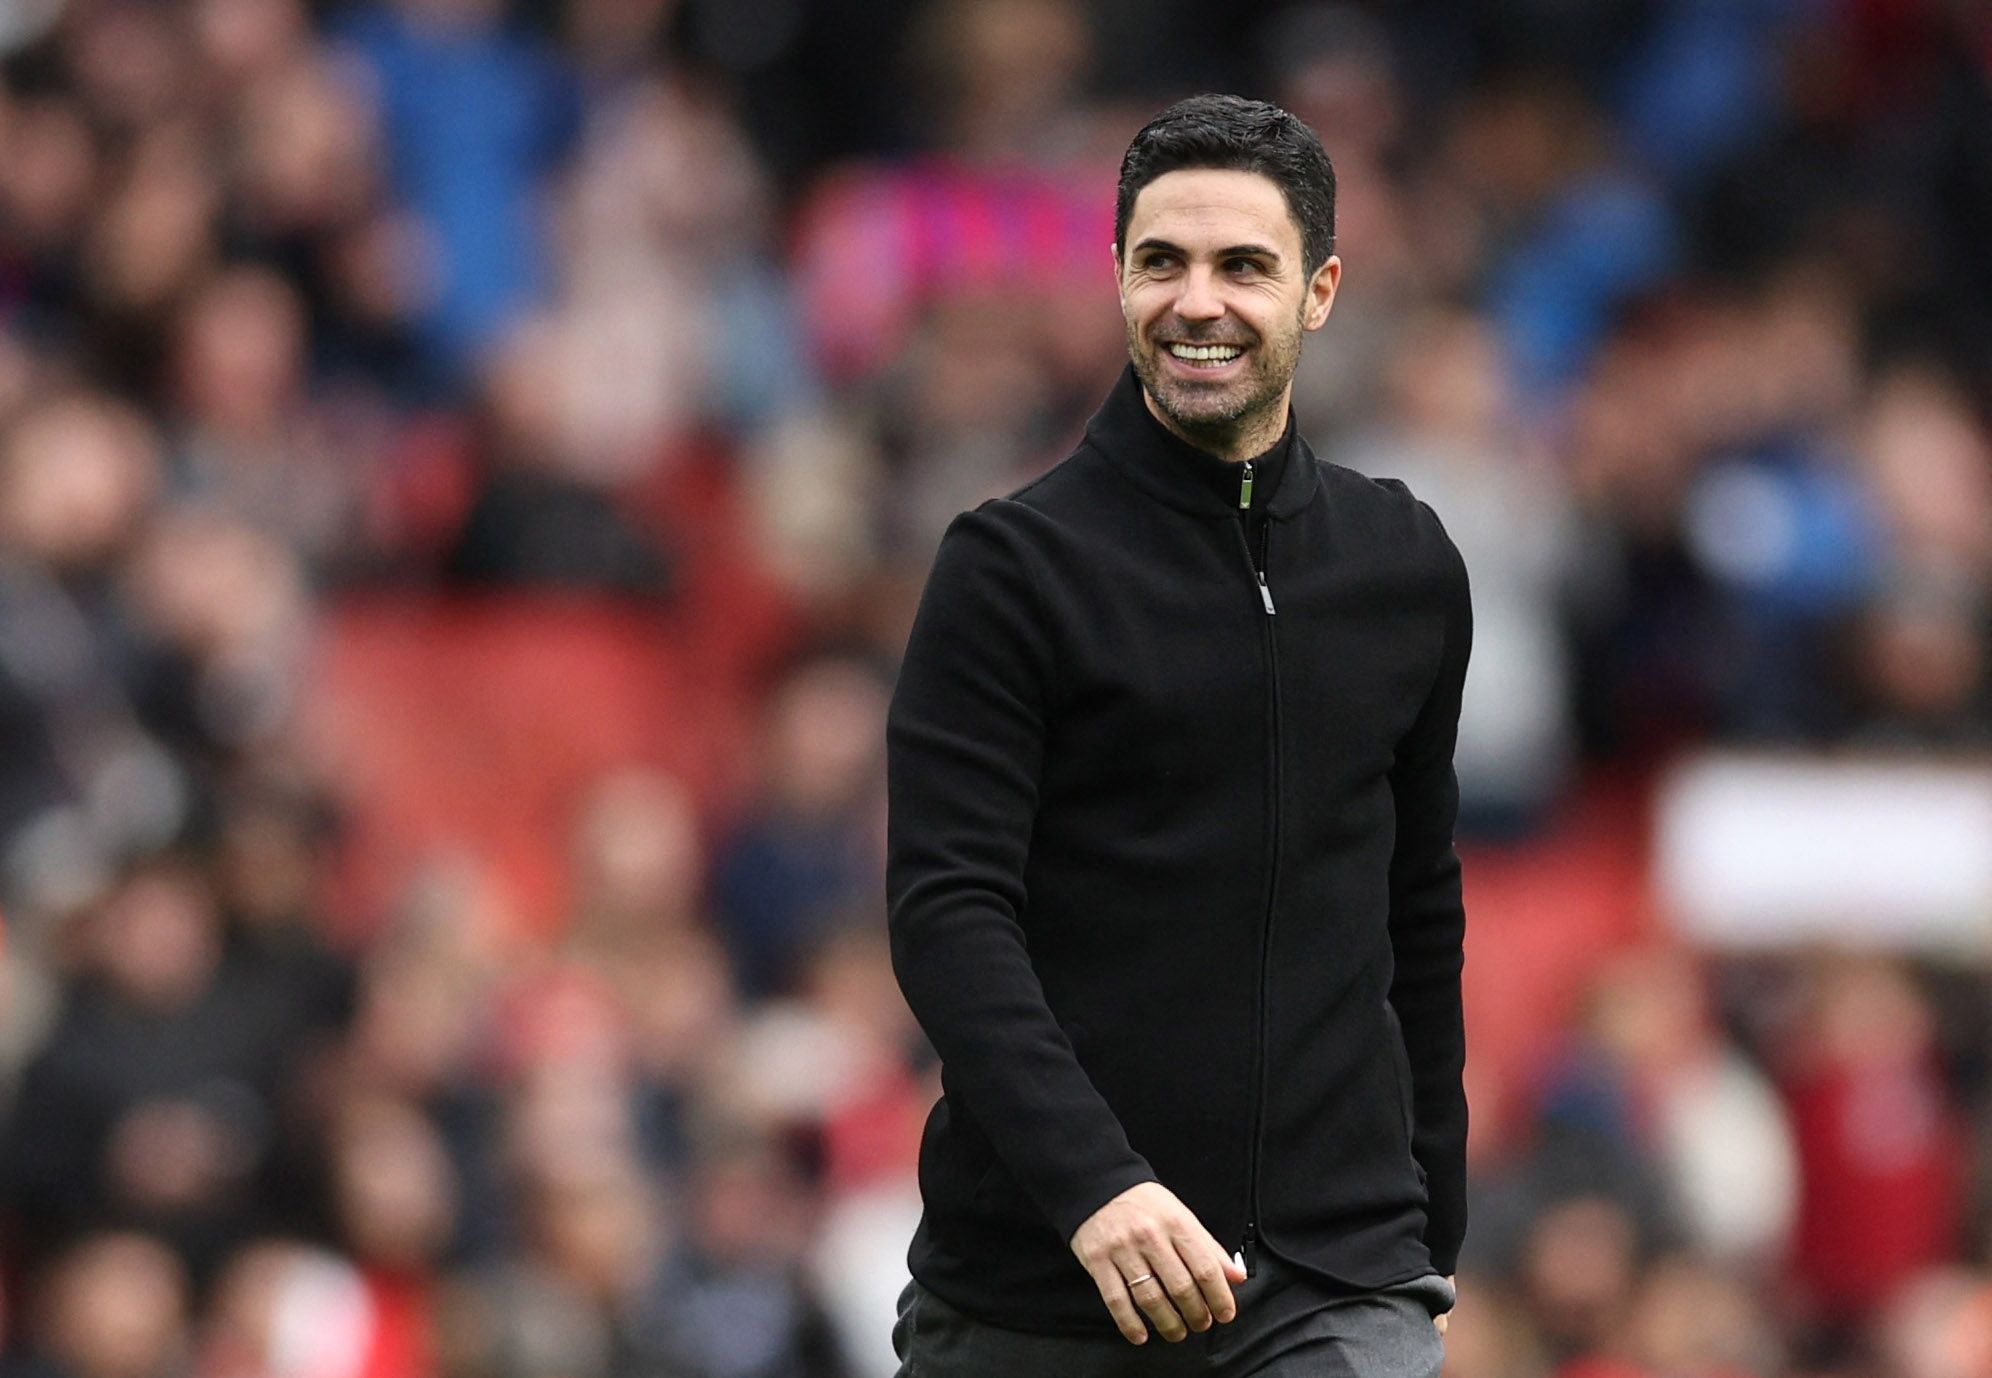 Arsenal manager Mikel Arteta smiling after victory